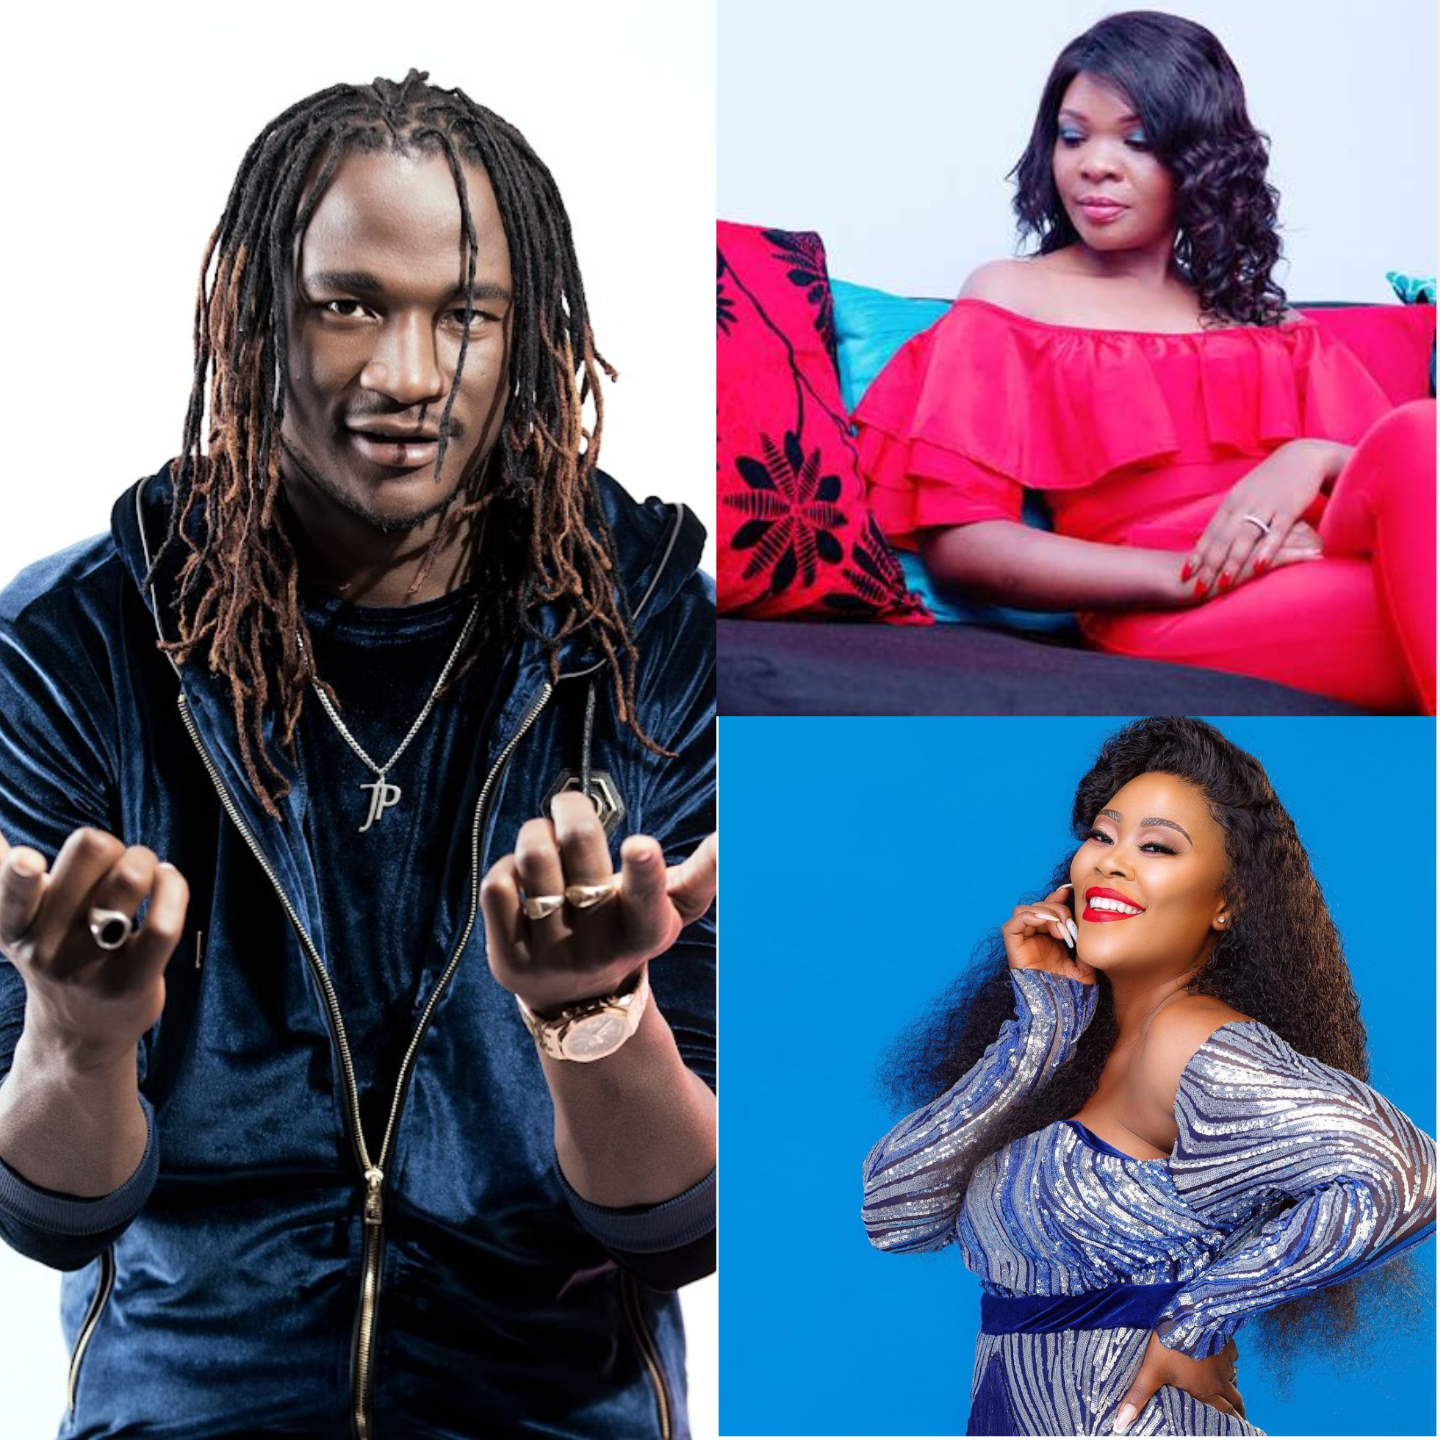 iHarare Social Media News| Madam Boss Cries Out For Help After Receiving Death Threats | Mai Titi's Post After Deliwe Is Released By Police Raises Eyebrows| Jah Prayzah Meets President Emmerson Mnangagwa